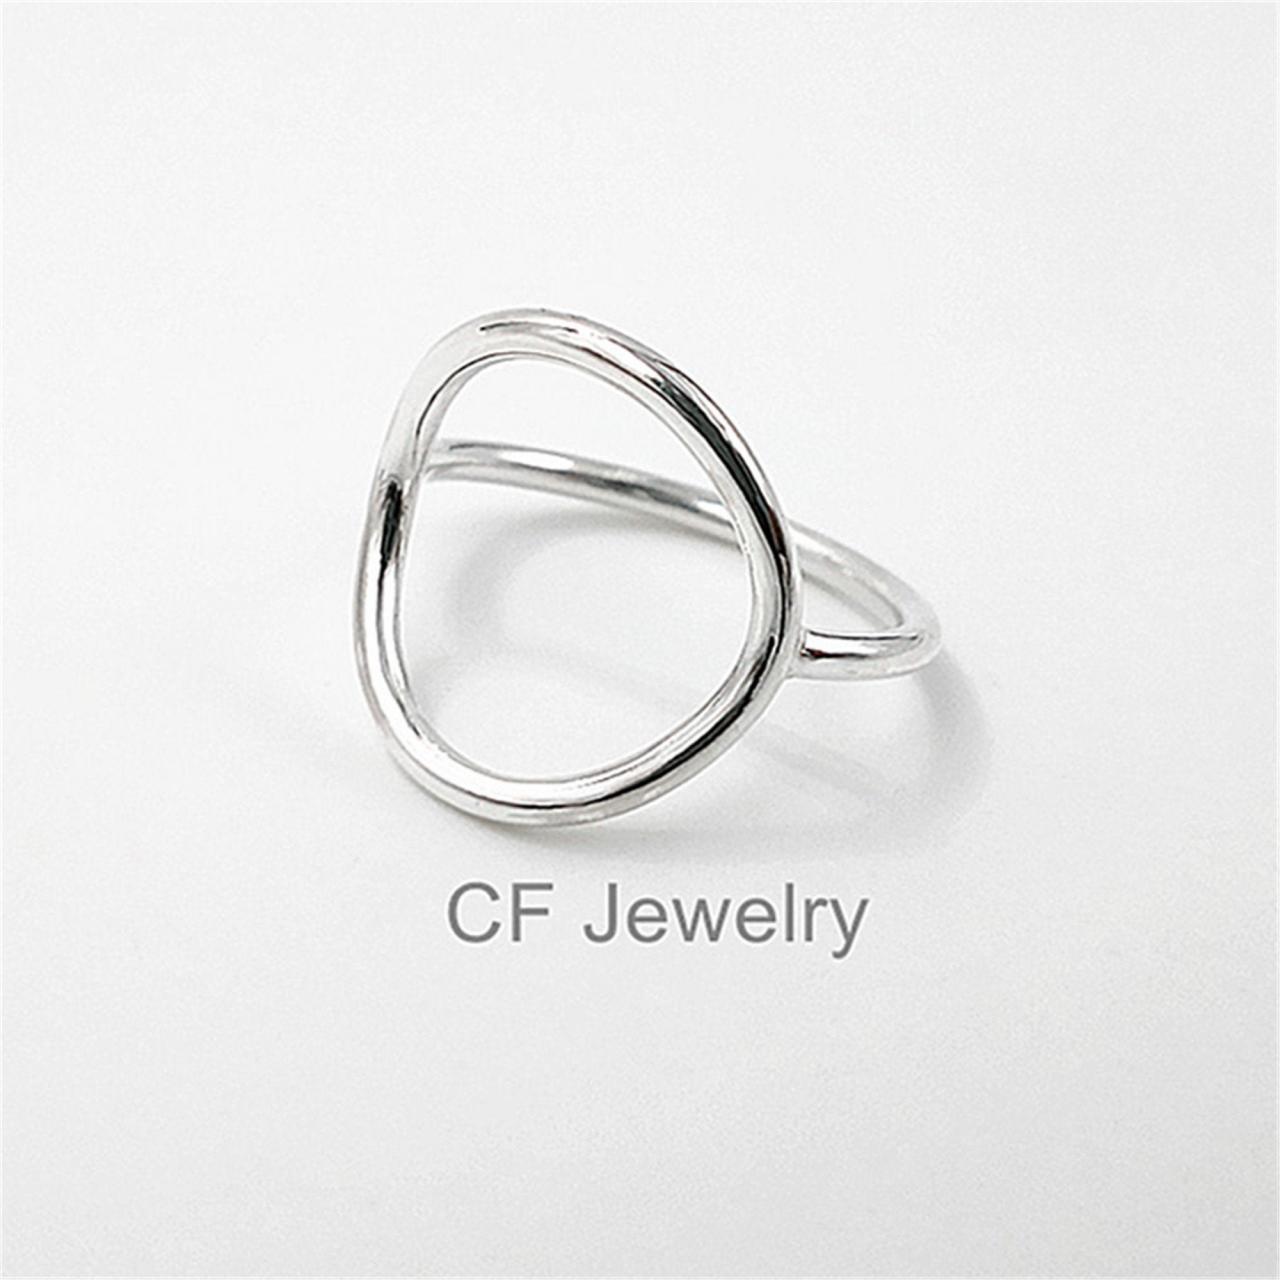 Open Circle Ring Sterling Silver Karma Circle Ring Full Circle Ring Closed Circle Ring Geometric Rings Minimalist Rings Statement Rings For Women